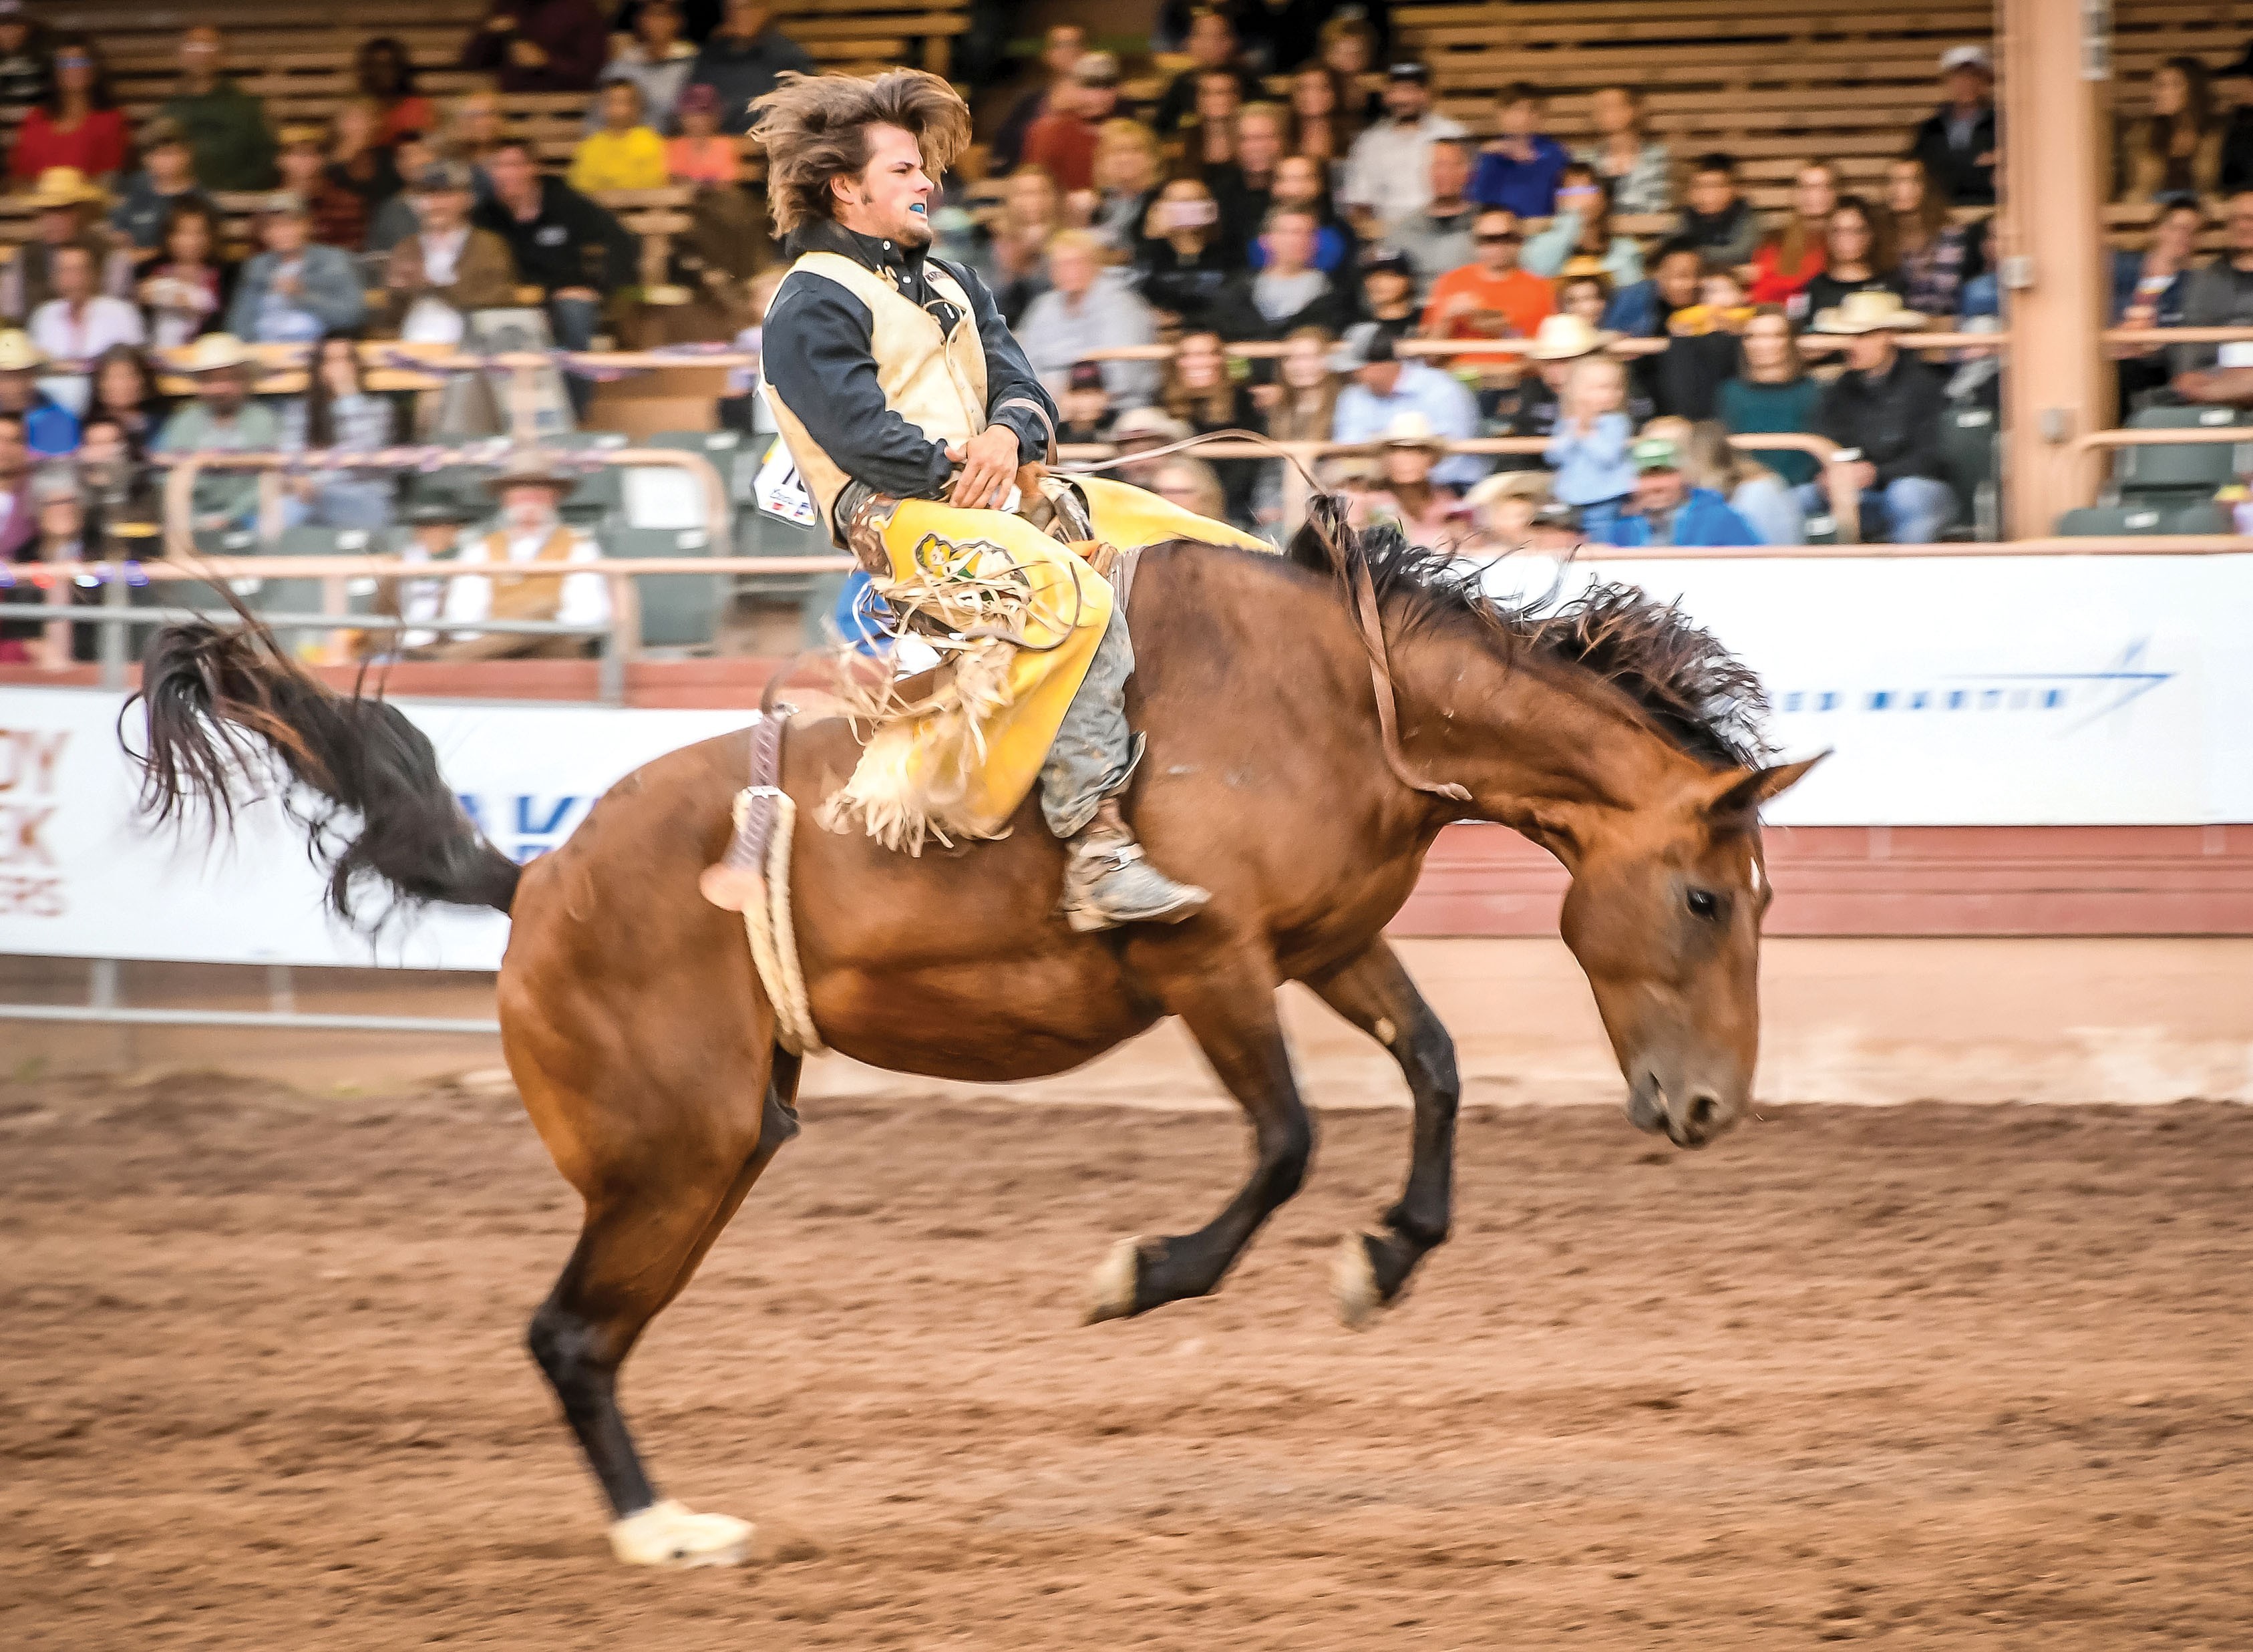 Carson wrangles up fun at rodeo Article The United States Army